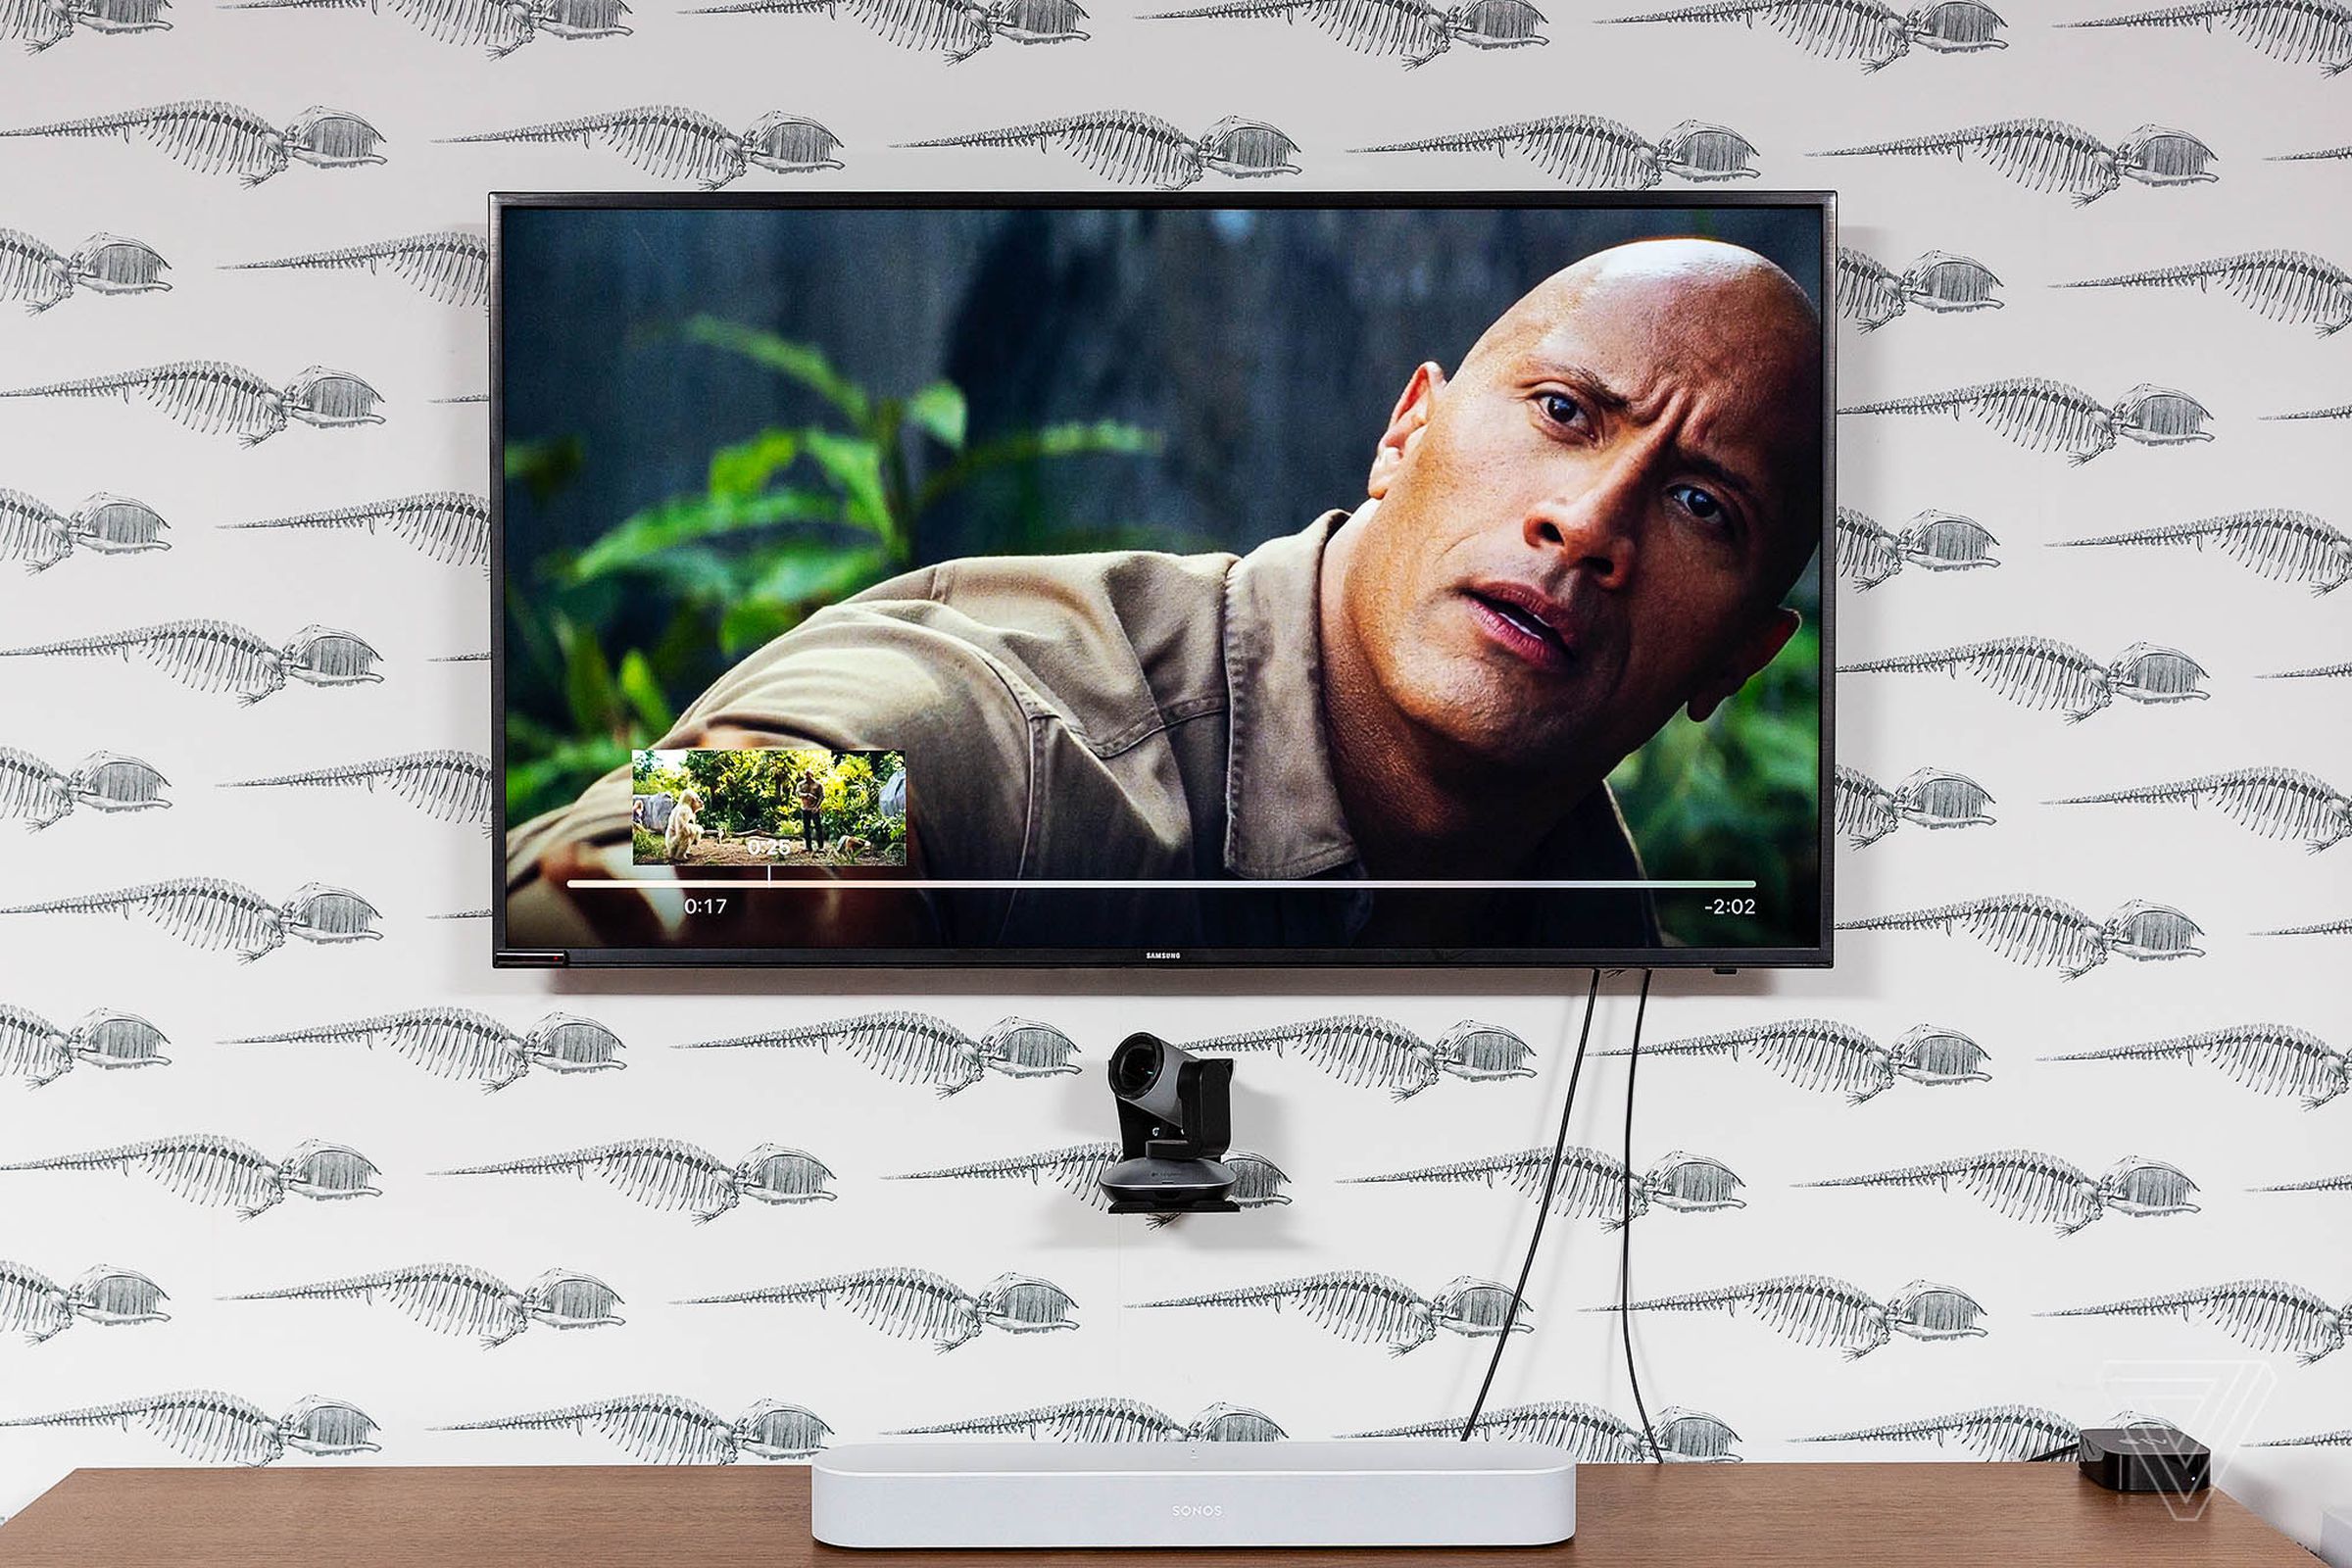 The Sonos Beam shown on an entertainment center with Dwayne “The Rock” Johnson displayed on a TV.